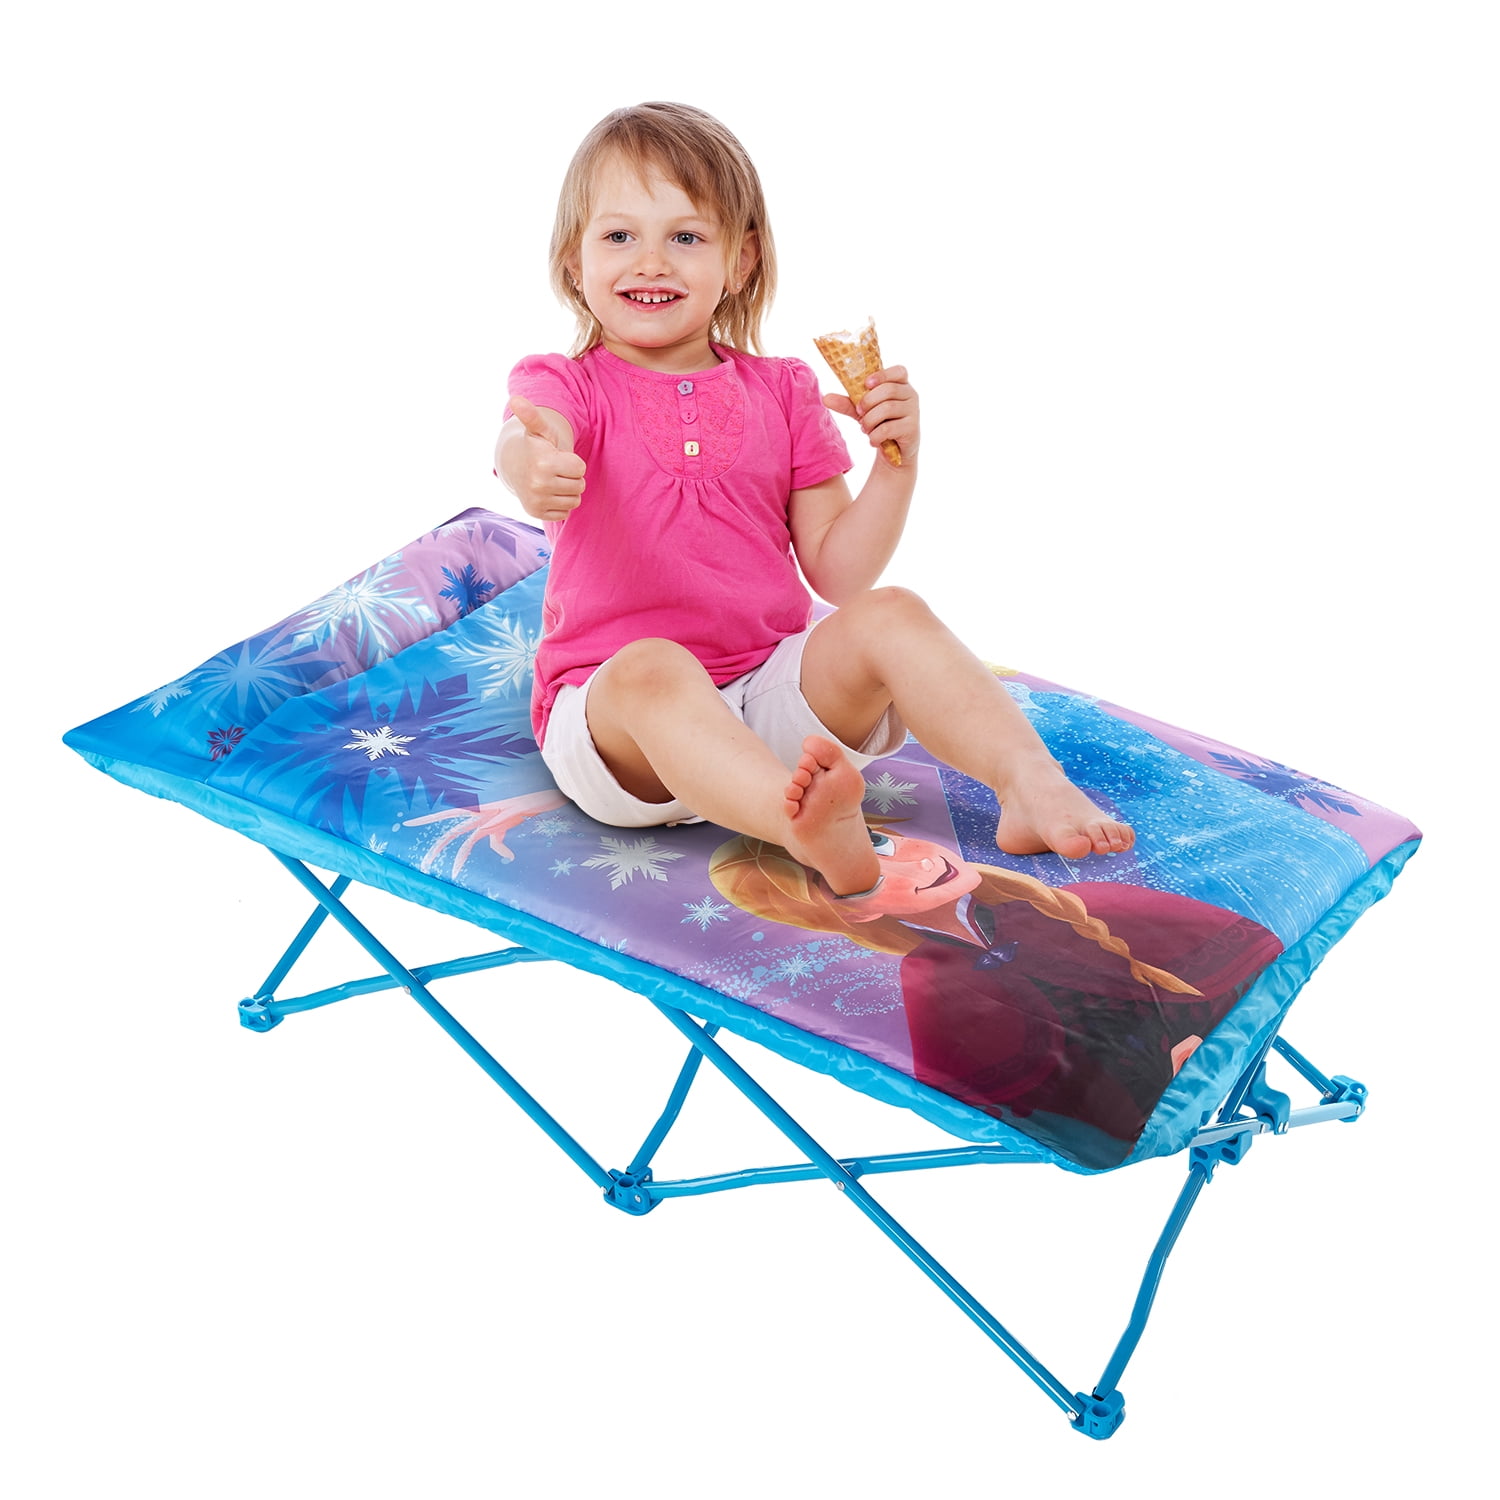 childs folding bed